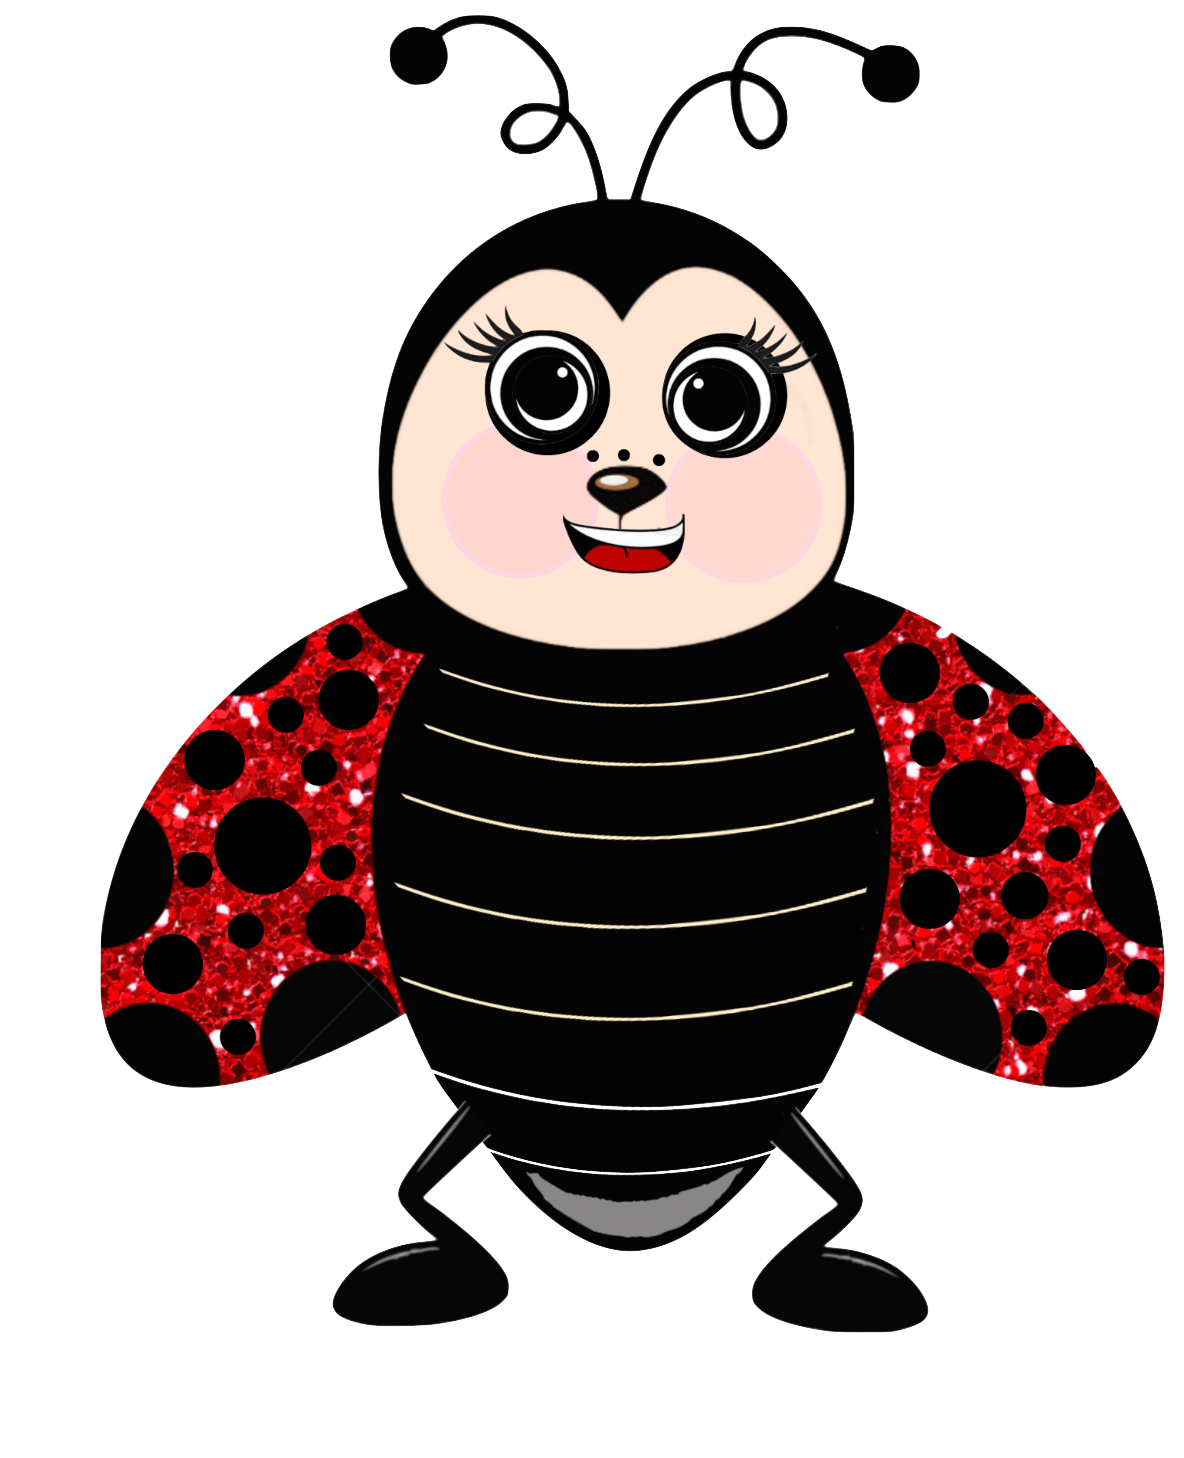 Ladybug stands with a big happy smile